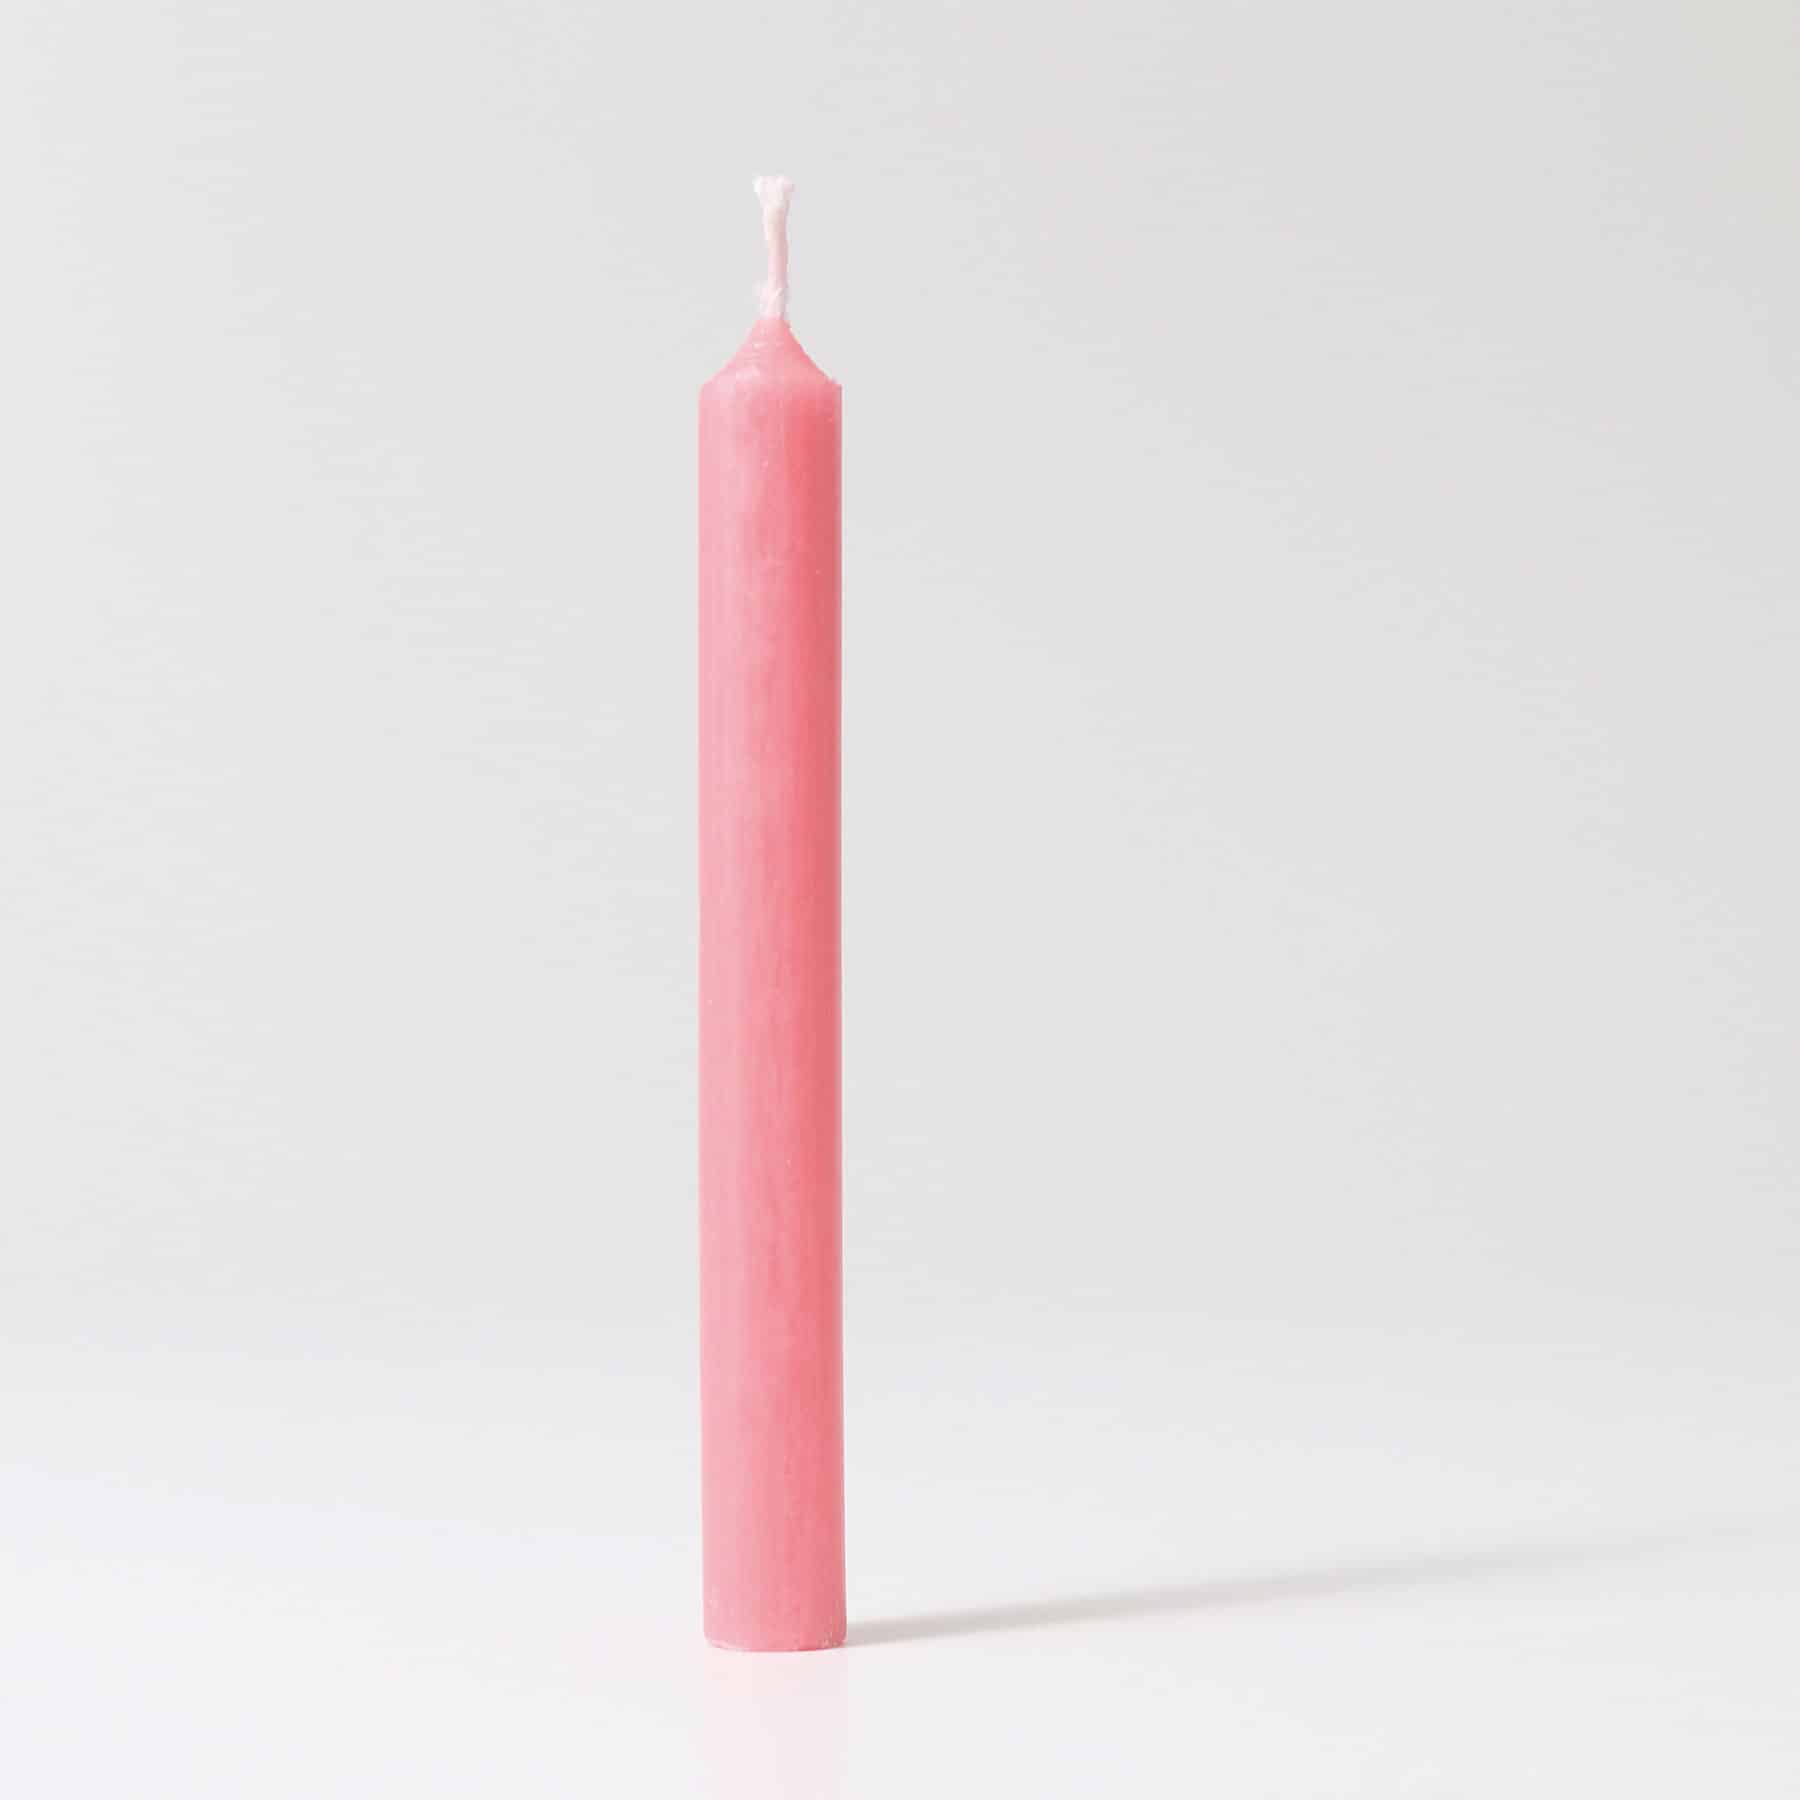 05183 Grimms Beeswax Candles - Old Rose